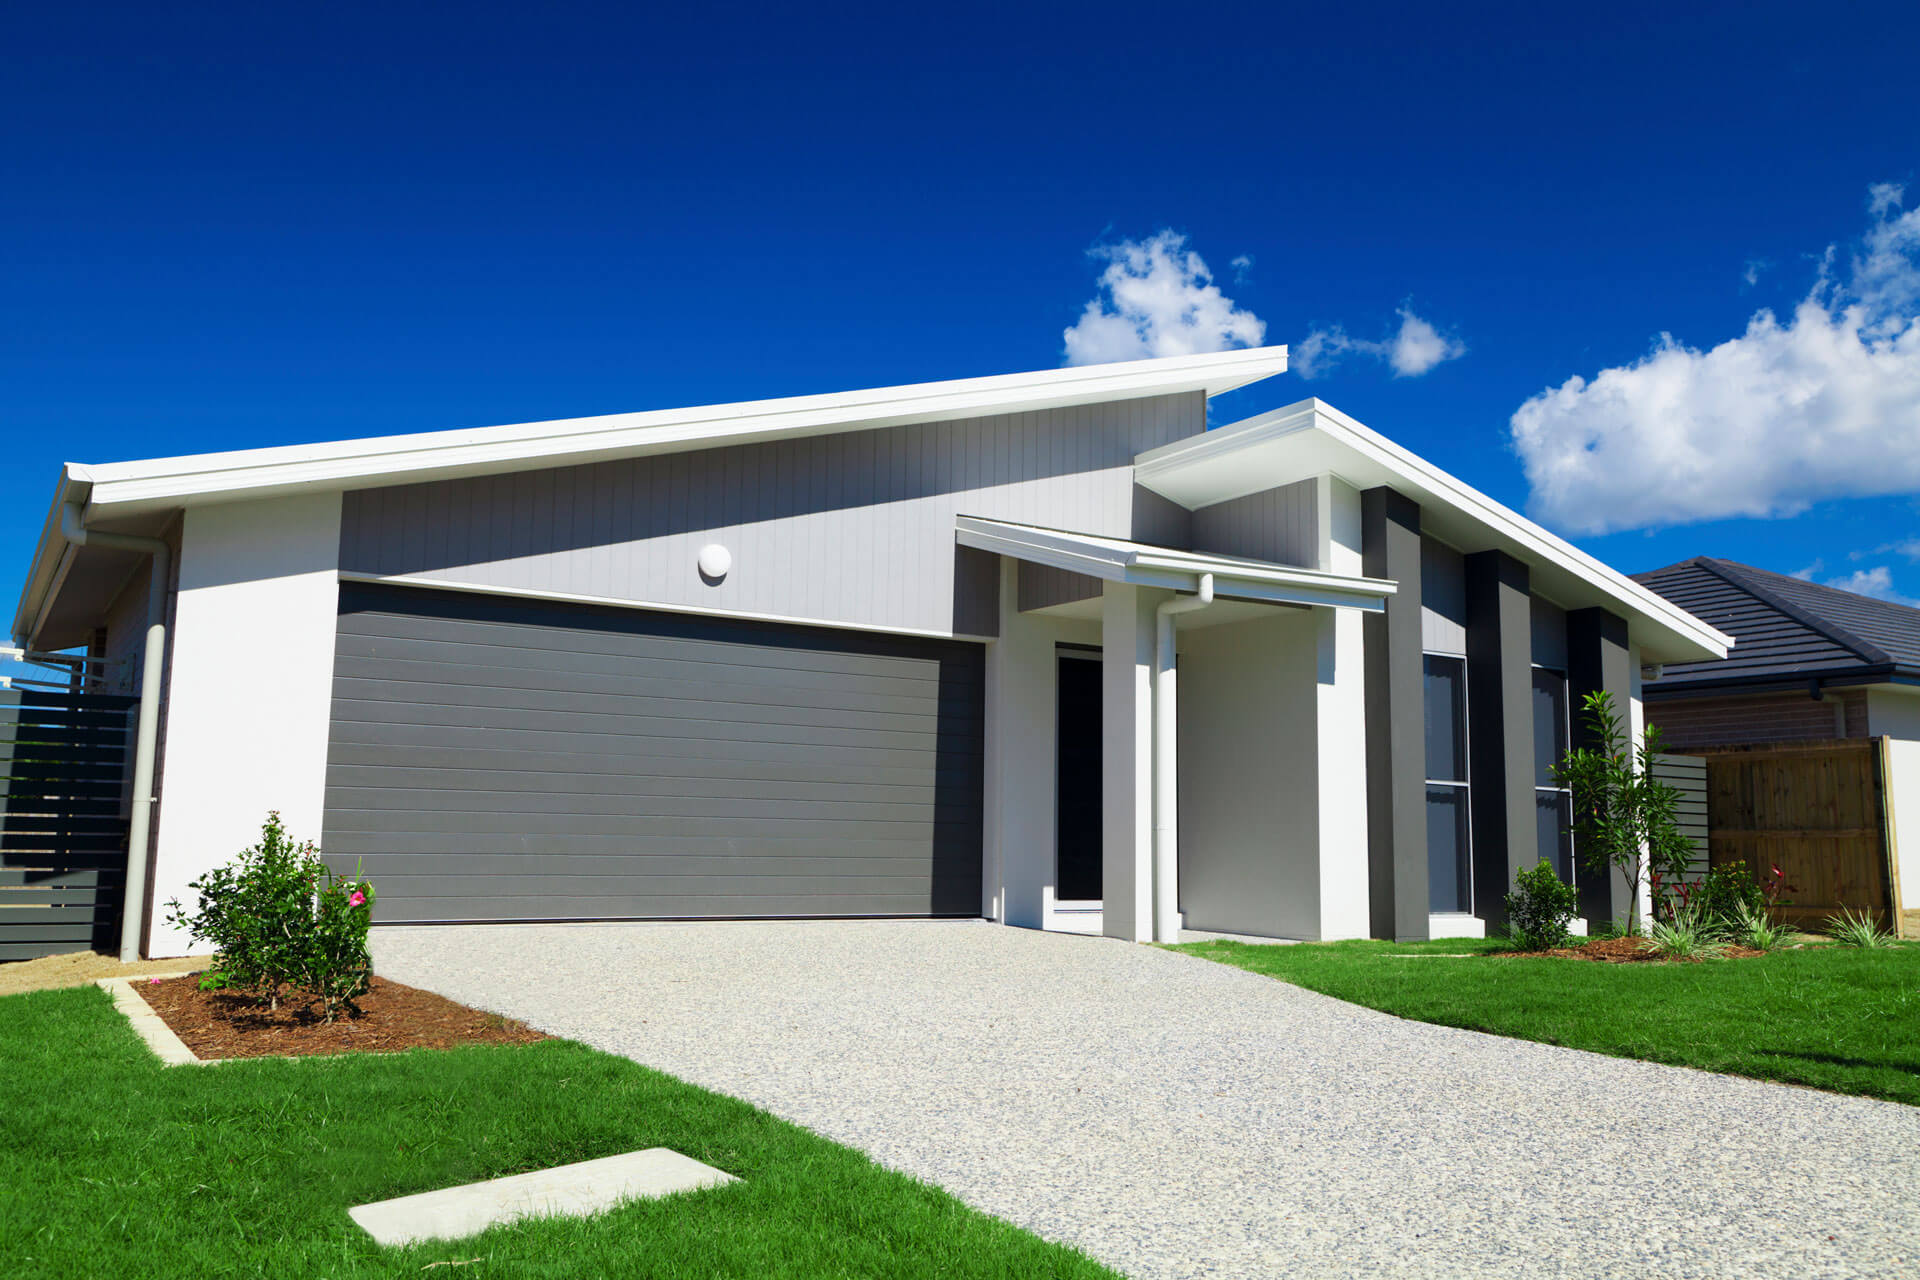 How To Choose A Garage Door For Your Home?